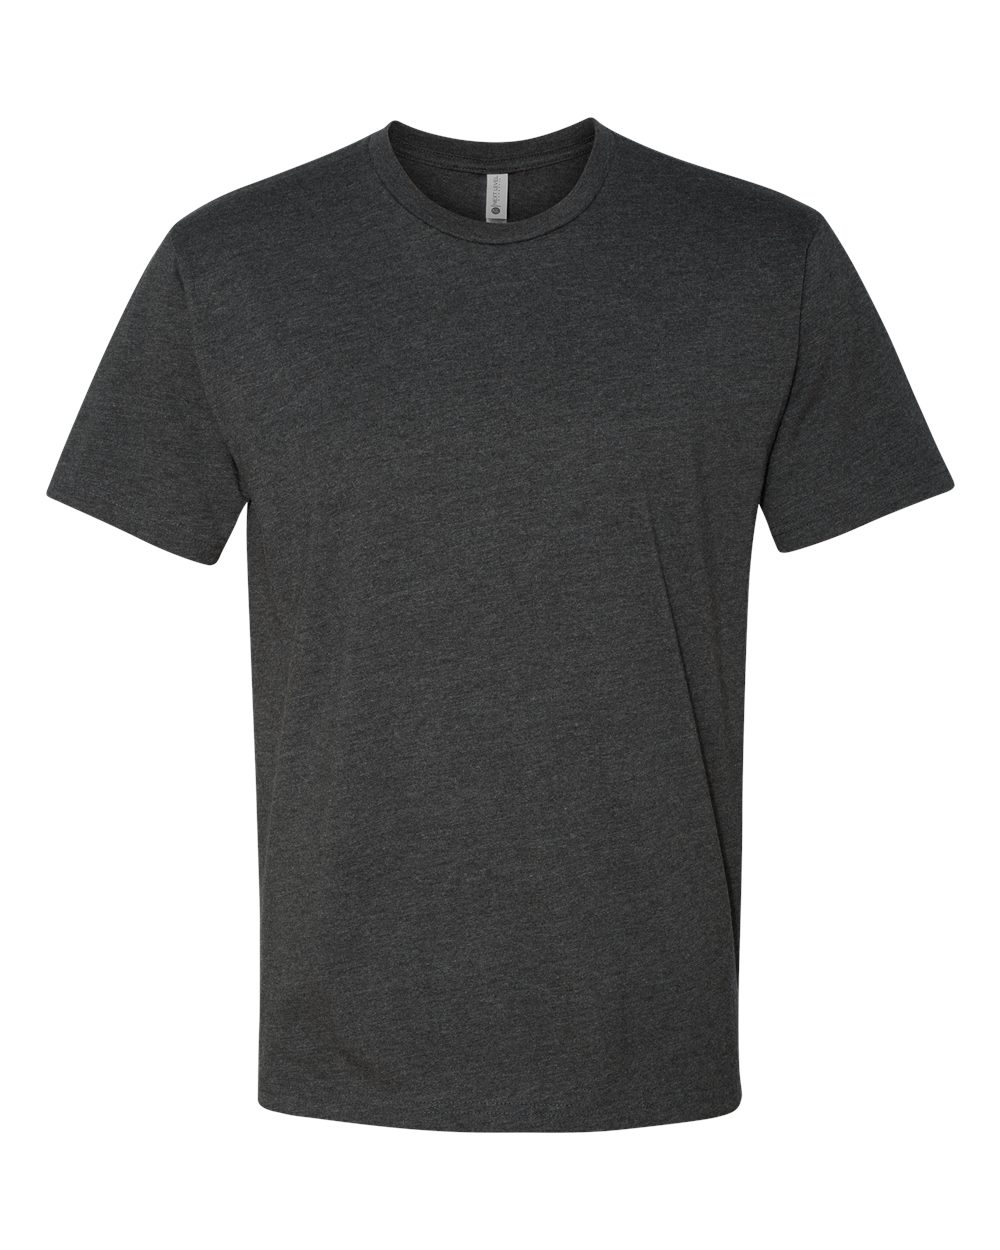 Next Level CVC Tee (6210) in Charcoal